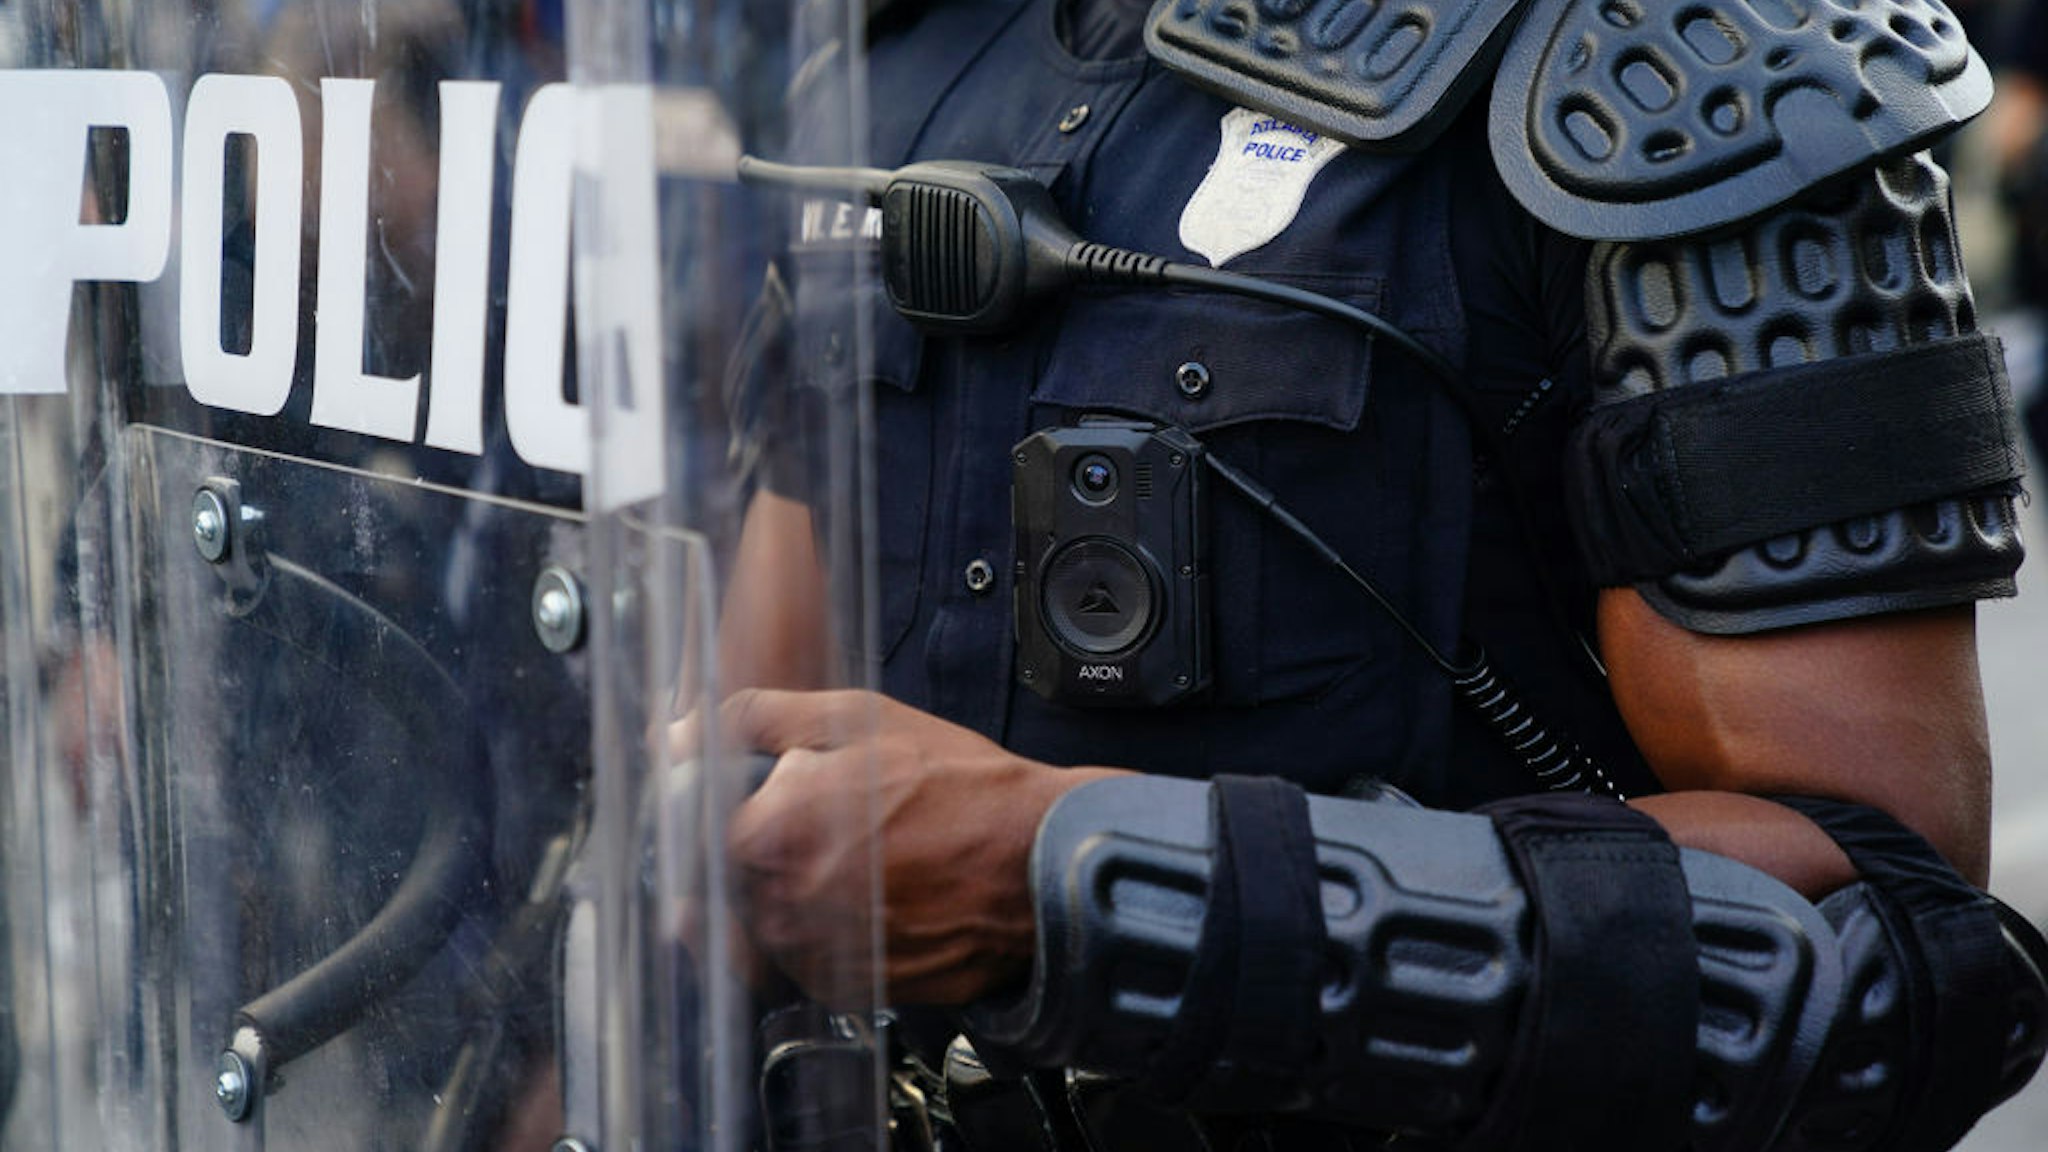 ATLANTA, GA - MAY 31: A police officer wearing a body cam is seen during a demonstration on May 31, 2020 in Atlanta, Georgia. Across the country, protests have erupted following the recent death of George Floyd while in police custody in Minneapolis, Minnesota. (Photo by Elijah Nouvelage/Getty Images)